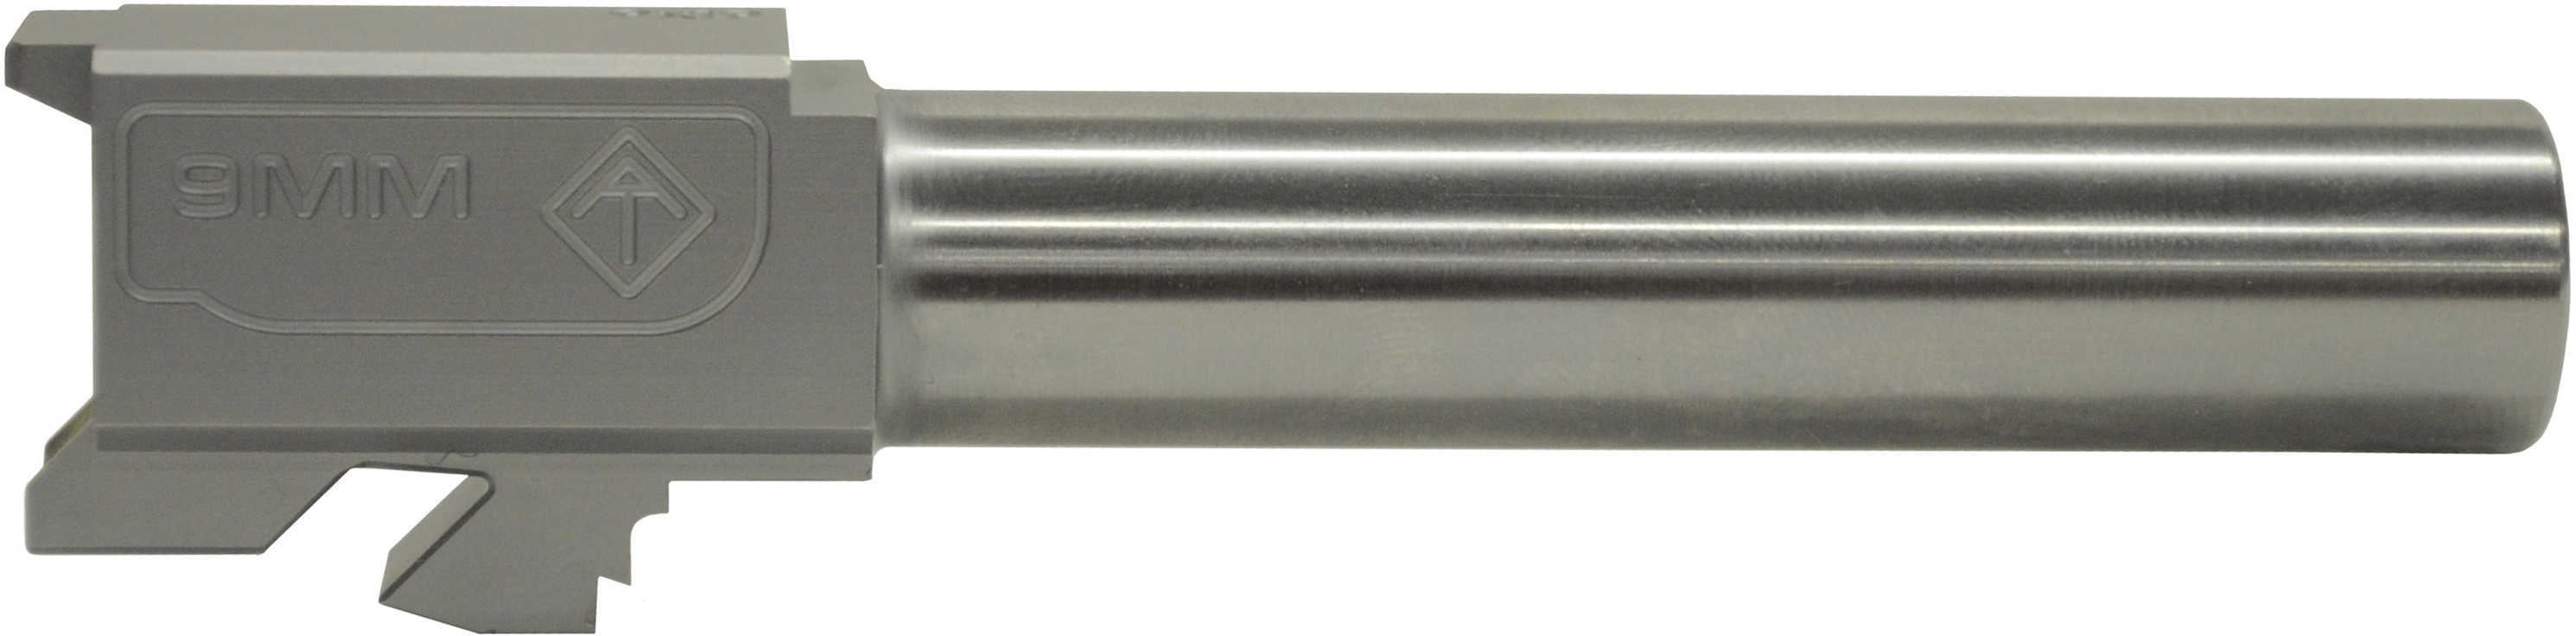 American Tactical Imports Match Grade Drop-In Barrel for Glock 17 9mm Non-Threaded Md: ATIBG17